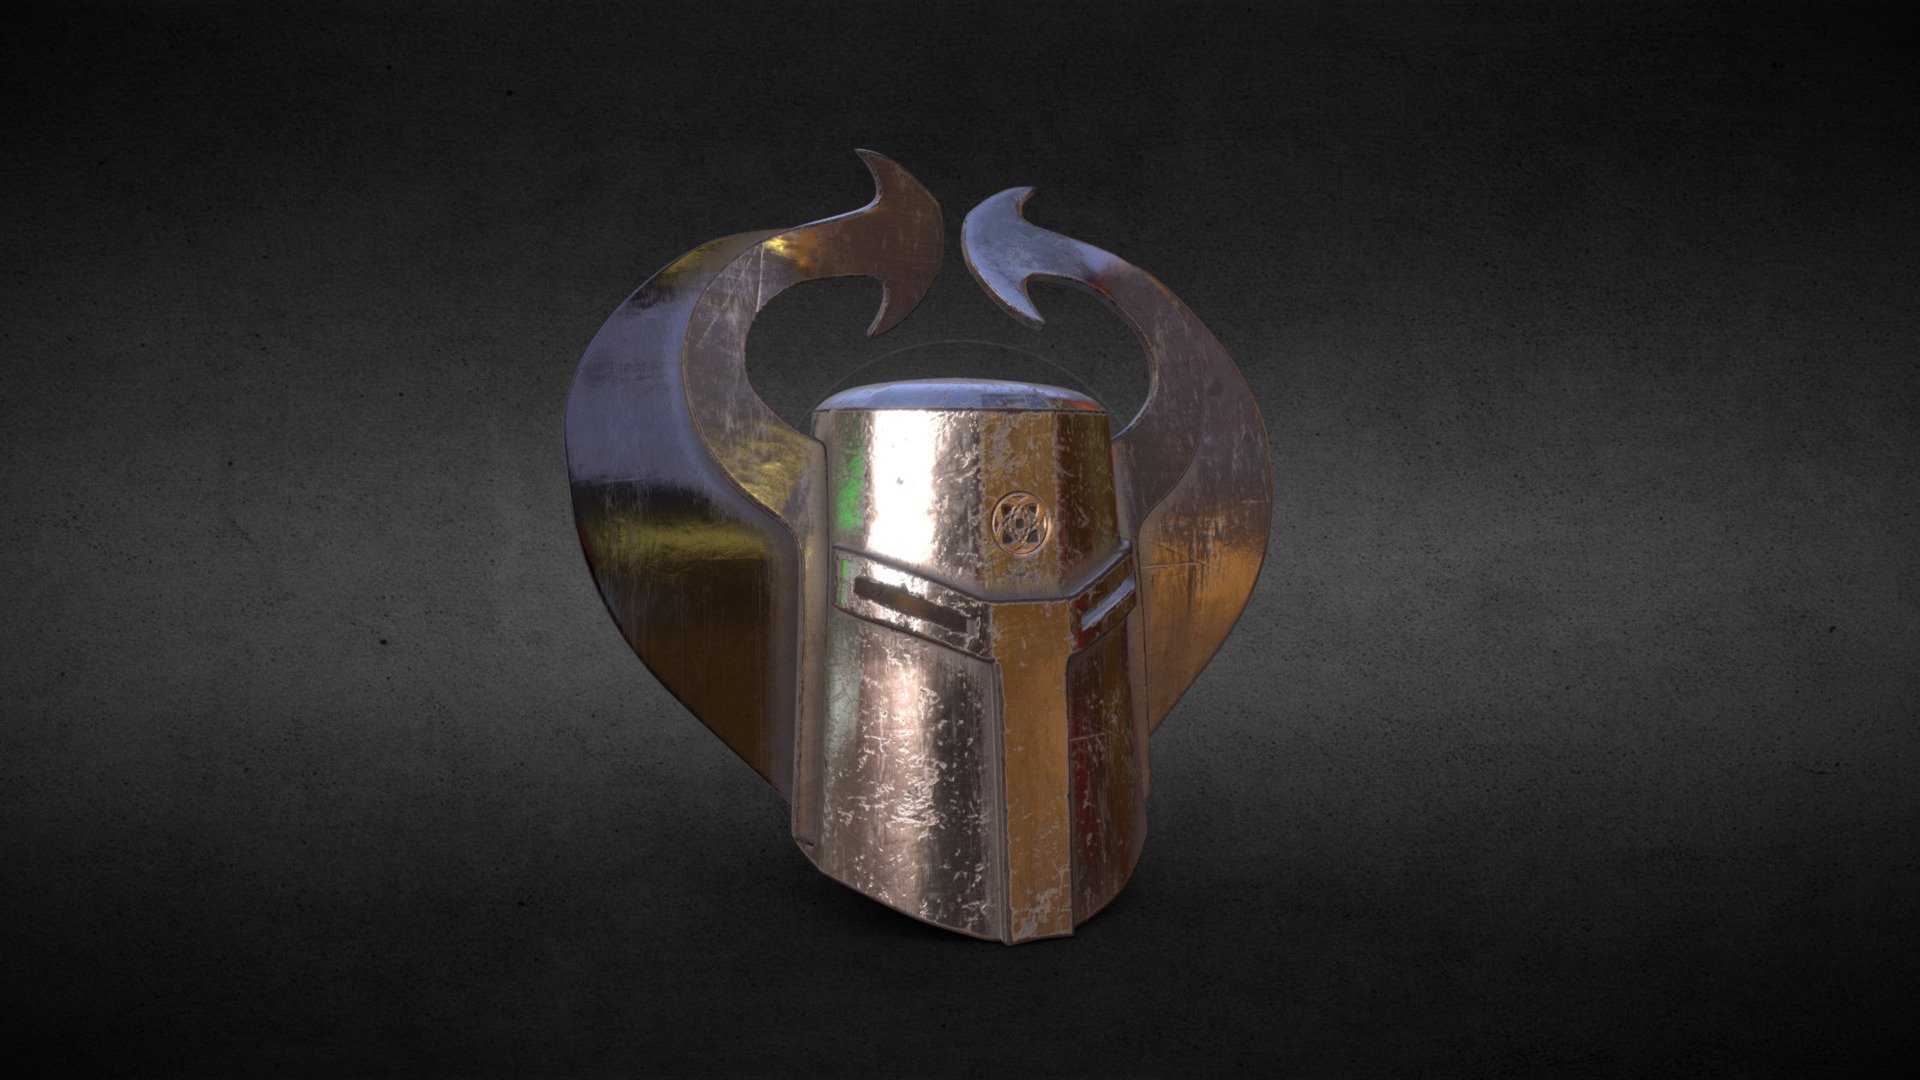 Helmet of king which became old and worn off.

Modelled in maya and textured in substance painter 3d model